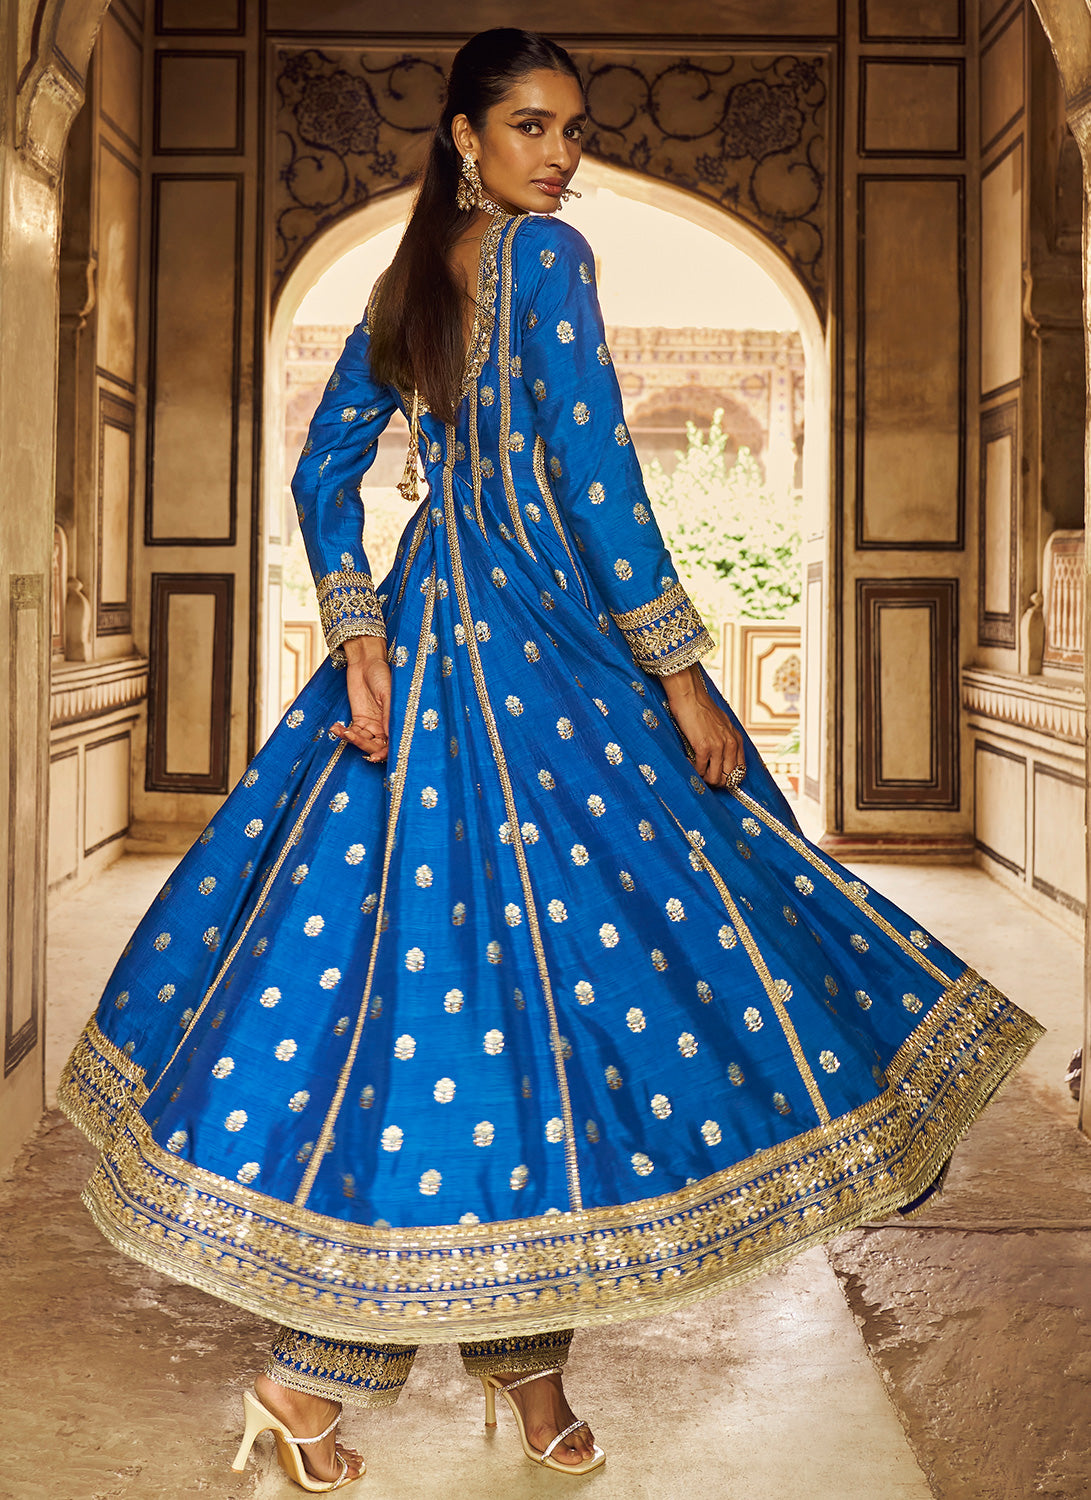 Mid Night Blue Anarkali Suit In Silk With Embroidered Bodice | Silk anarkali  suits, Fashion, Anarkali dress